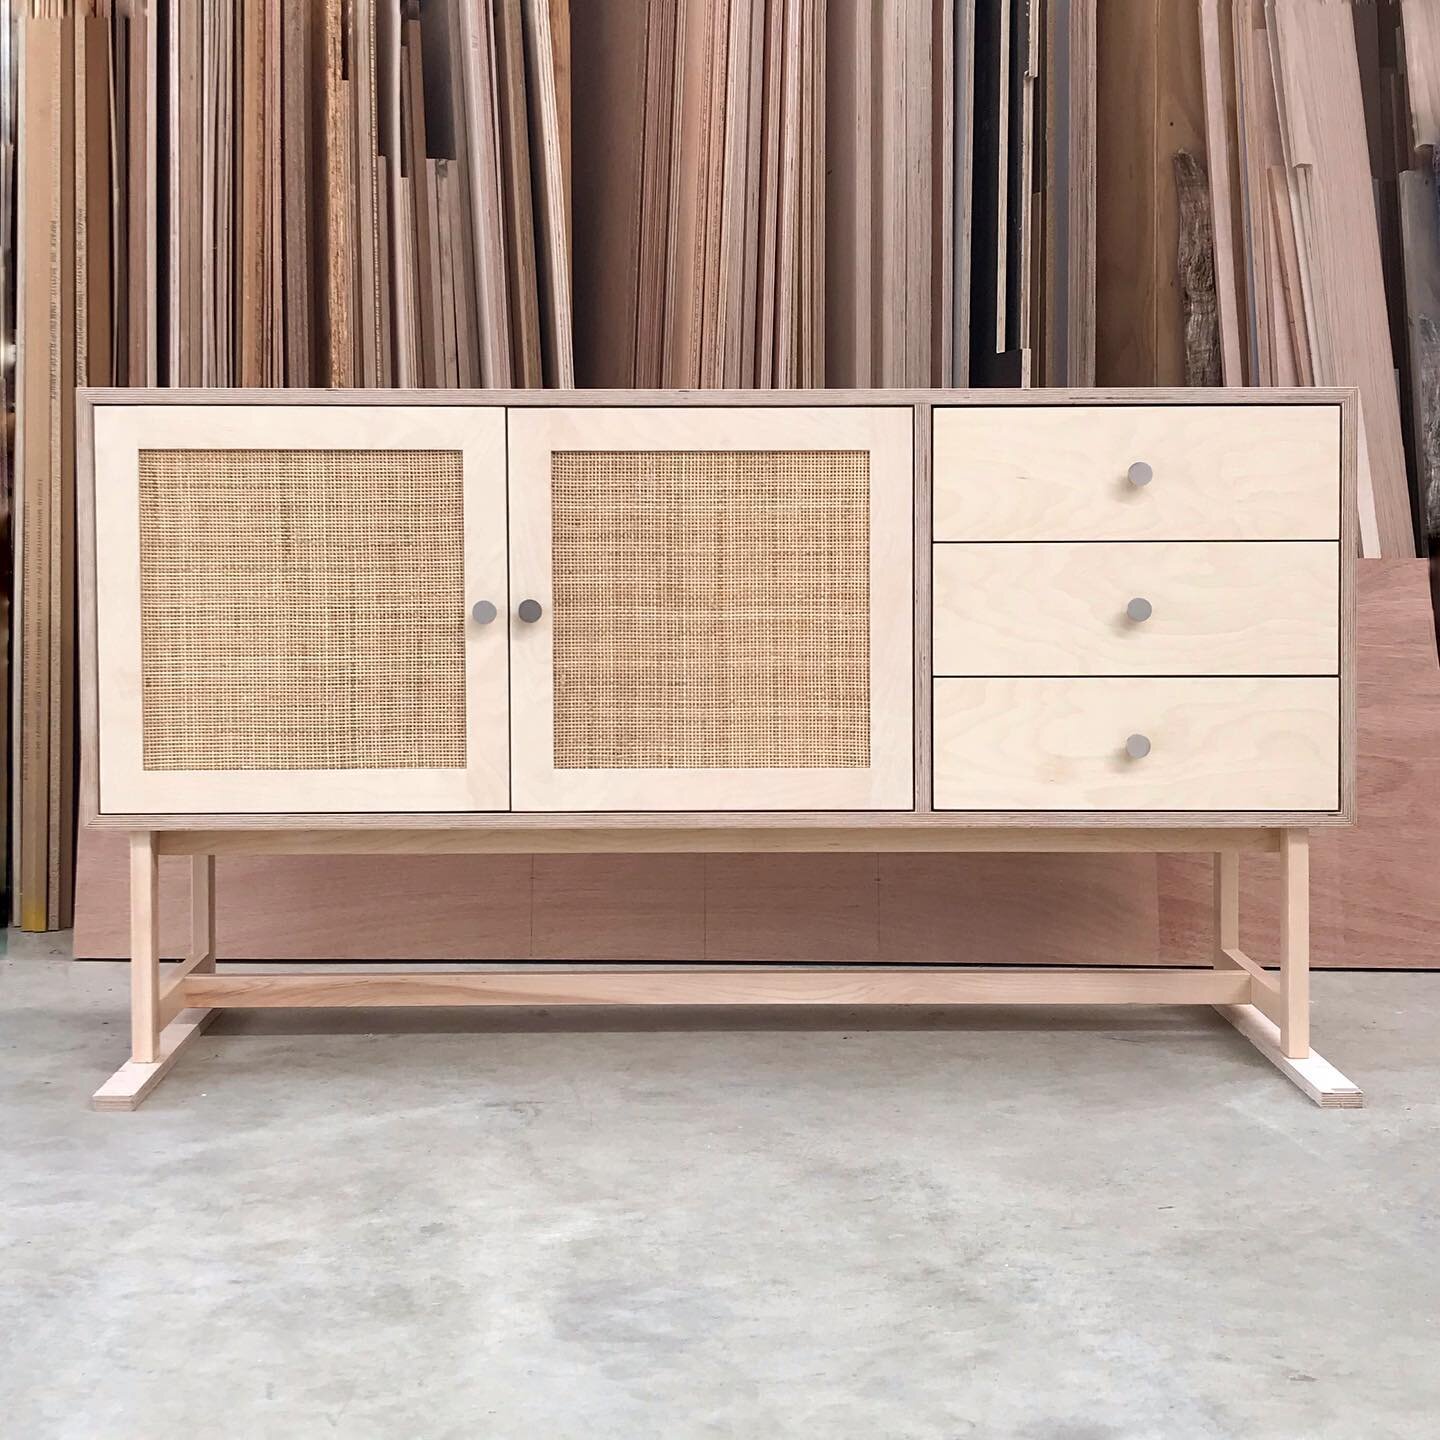 We call her 
.
❅︎ ❅︎ ❅︎ &lsquo;Miss Smilla&rsquo; ❅︎ ❅︎ ❅︎ 
.
A beautiful minimalistic sideboard in Birch and Rattan.
Paired with brushed nickel knobs, this colour variation has a fresh, nordic aesthetic. 

👉 Slide over to see Miss Smilla in a diffe